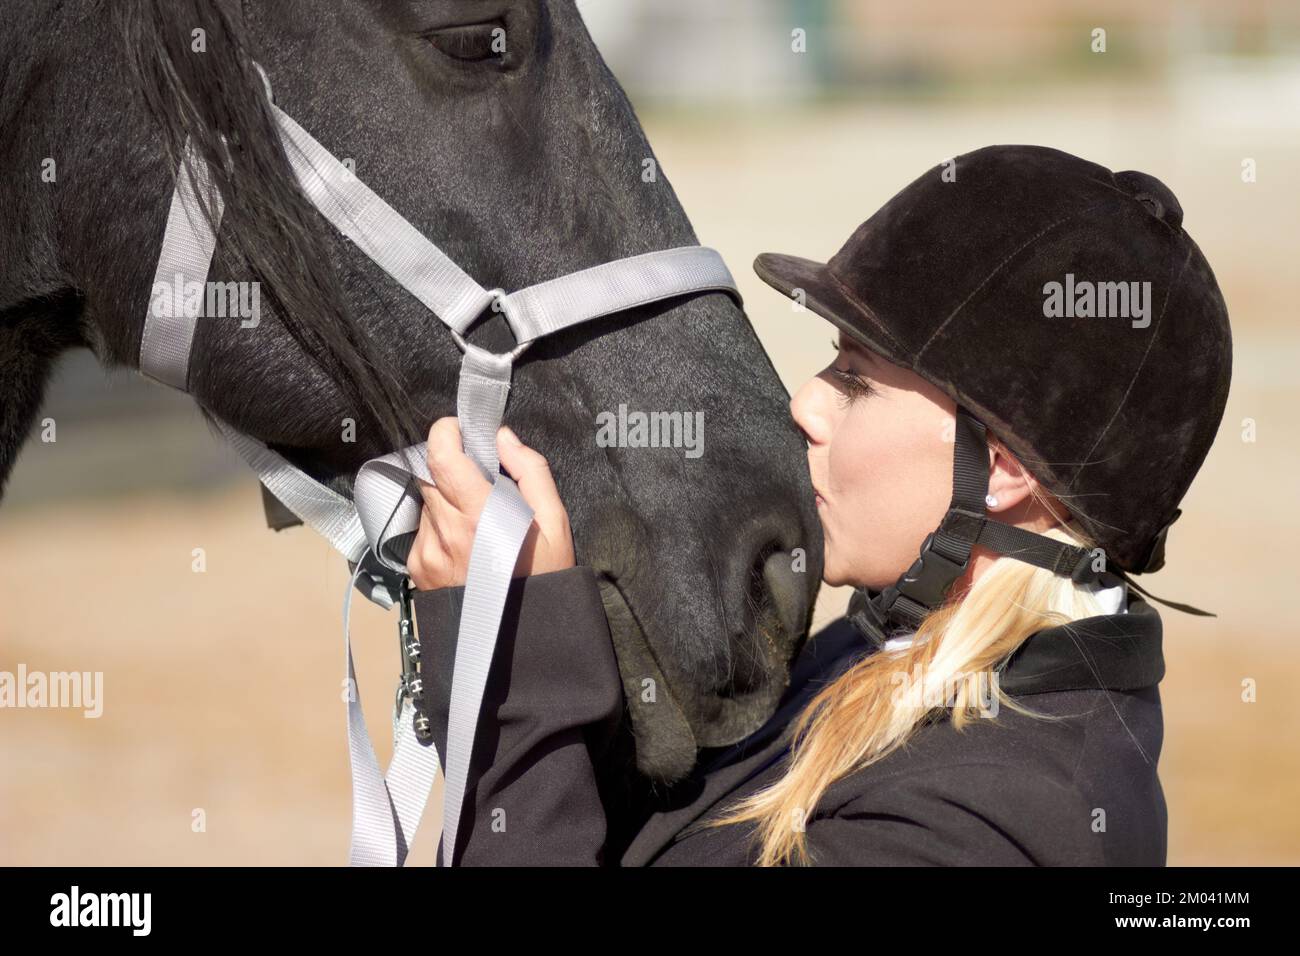 A strong bond between horse and rider. a young female rider giving her horse a kiss. Stock Photo